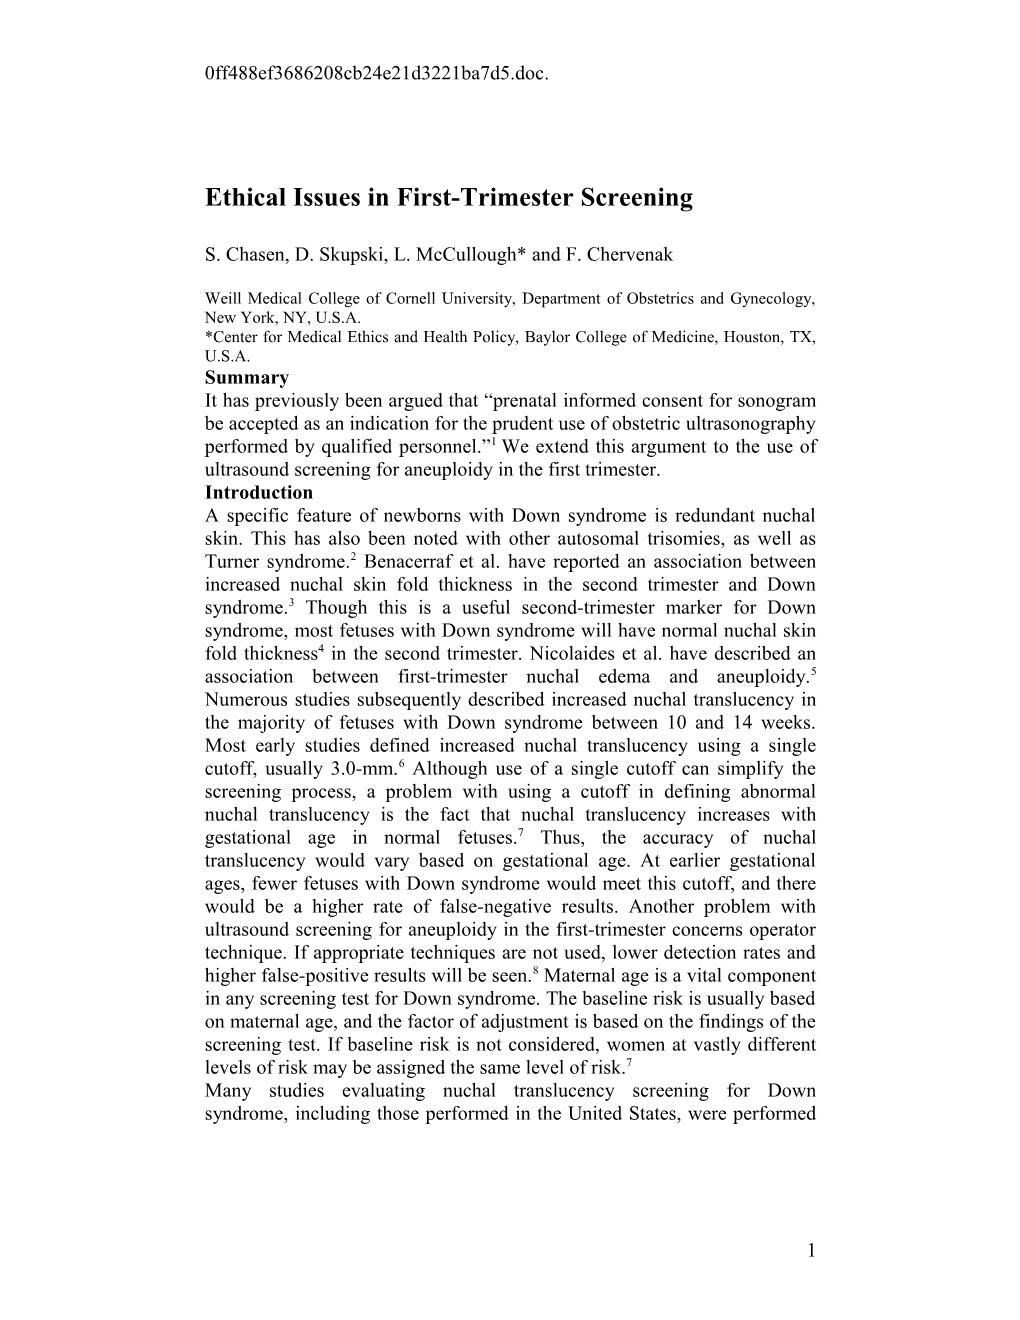 Prenatal Informed Consent for Sonogram: the Time for First Trimester Nuchal Transluceny Has Come